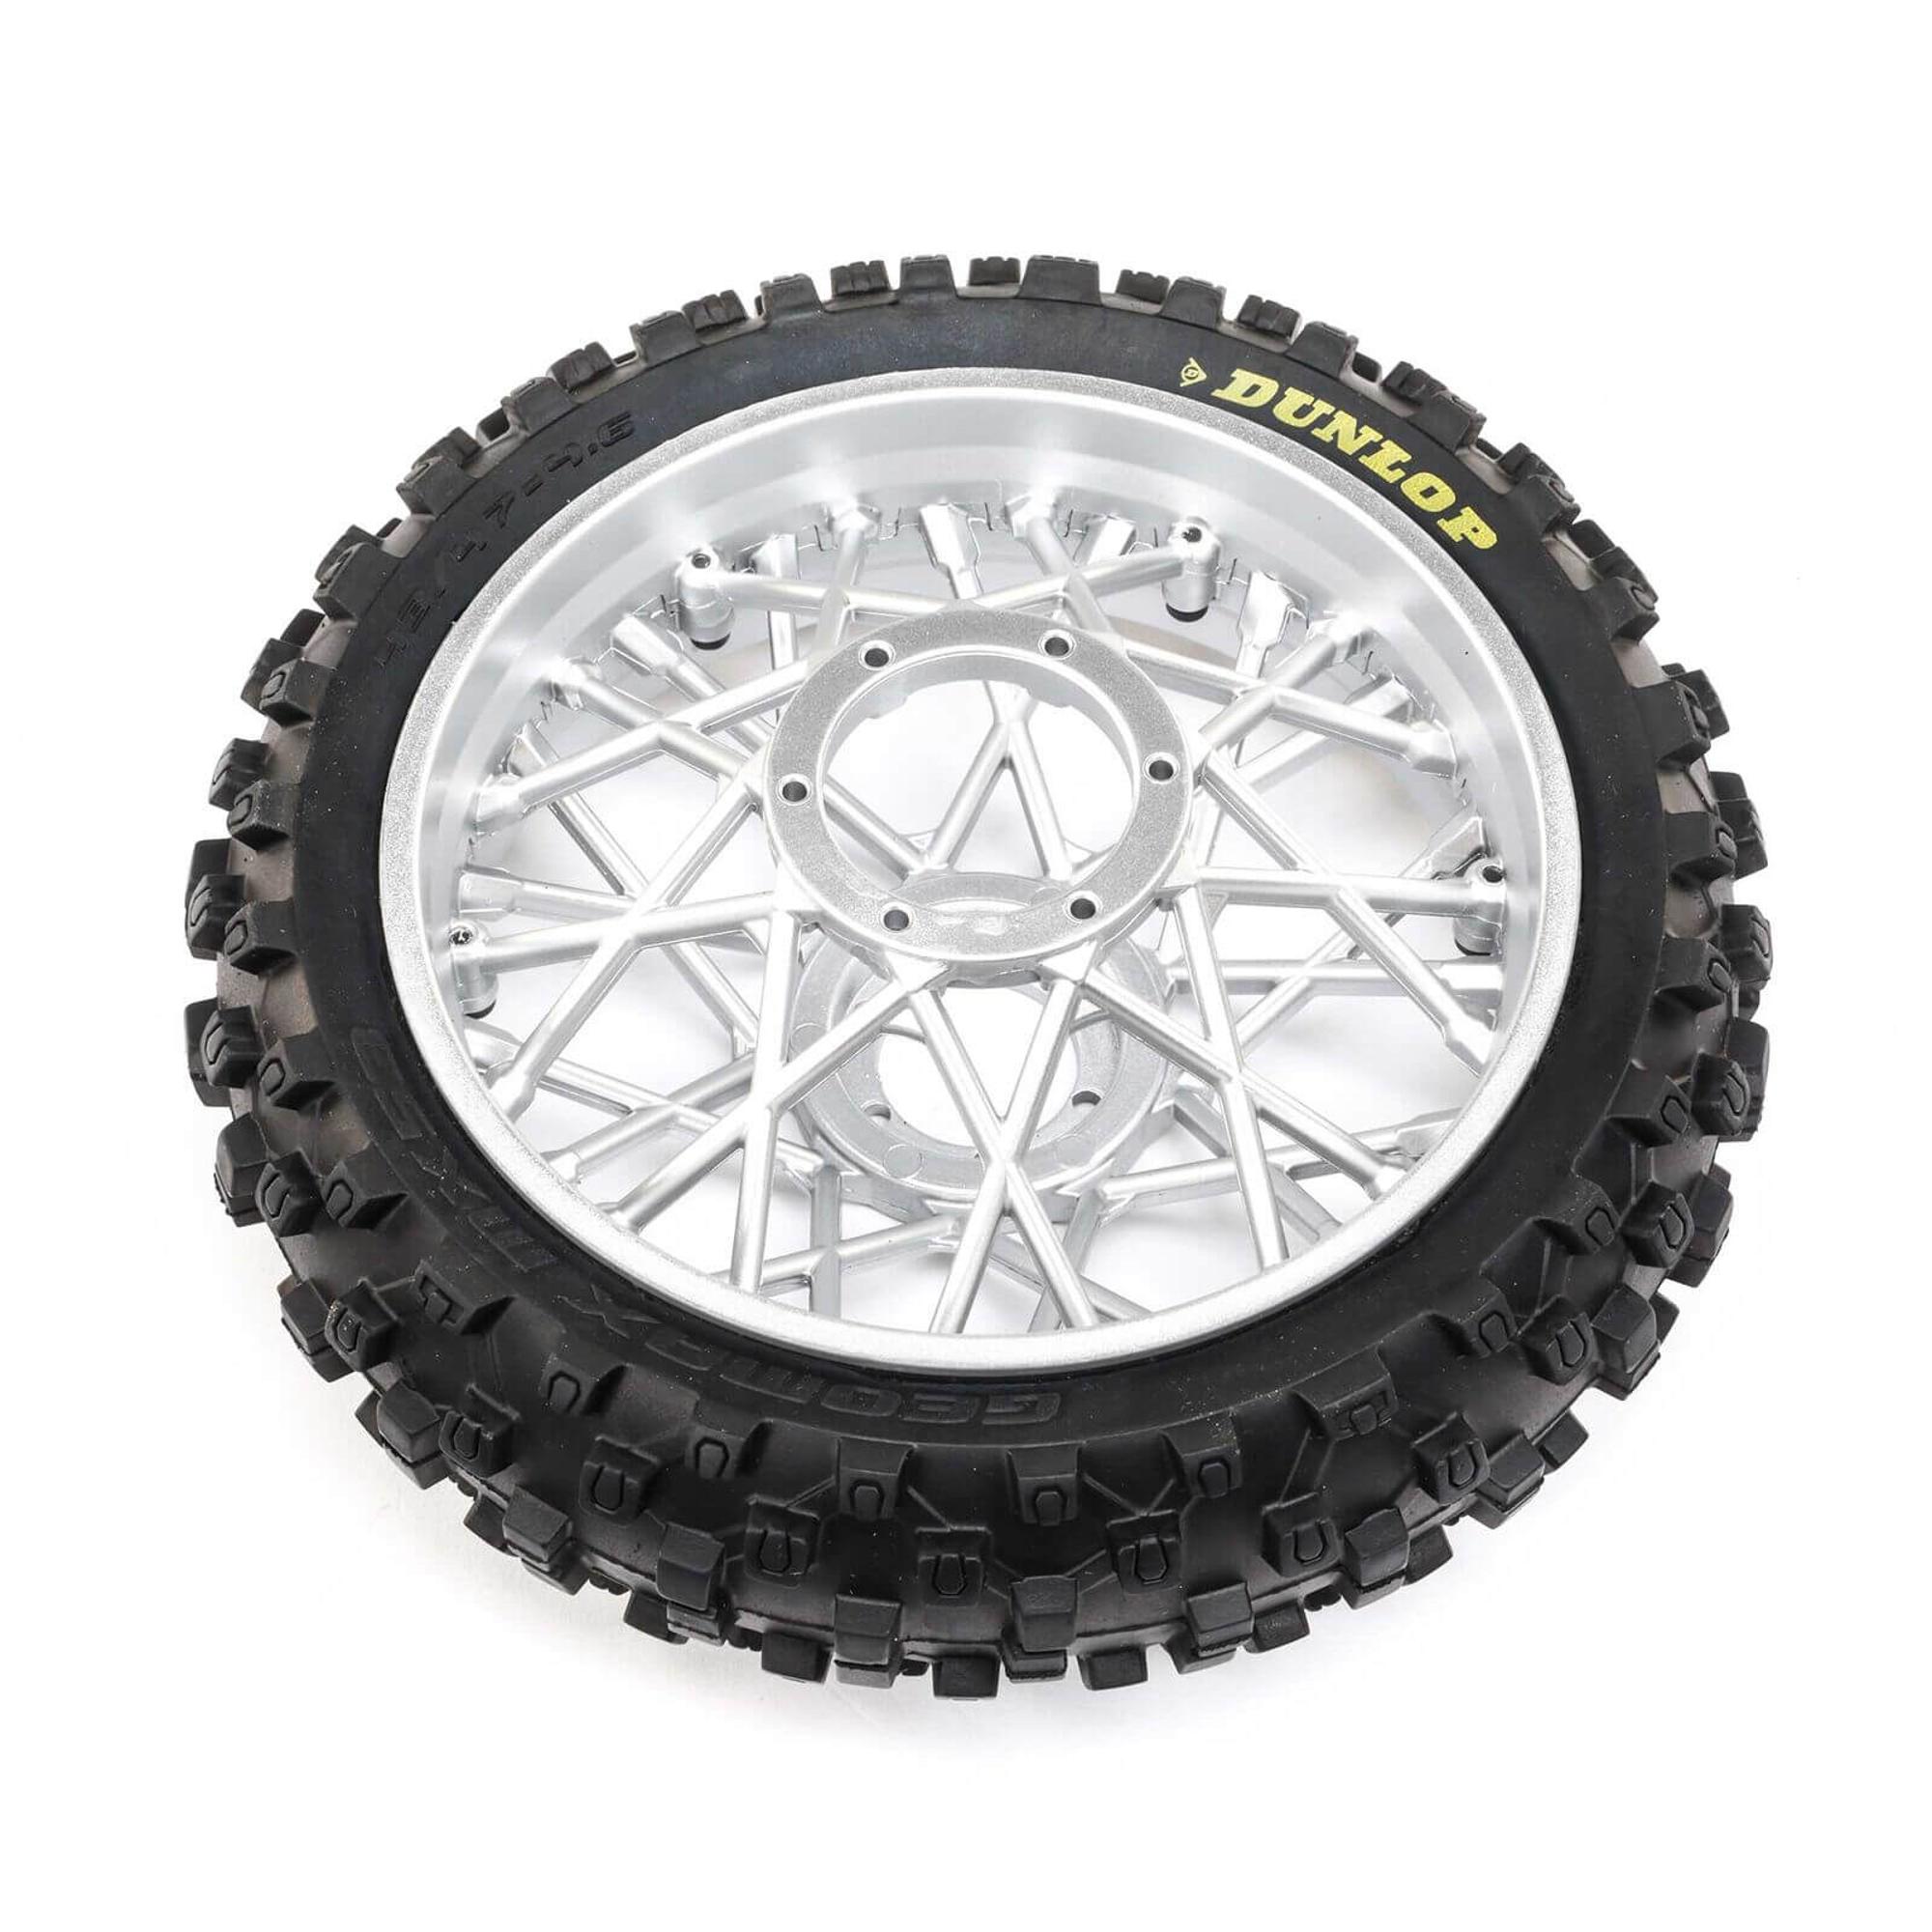 Dunlop MX53 Rear Tire Mounted for Promoto-MX (Chrome)